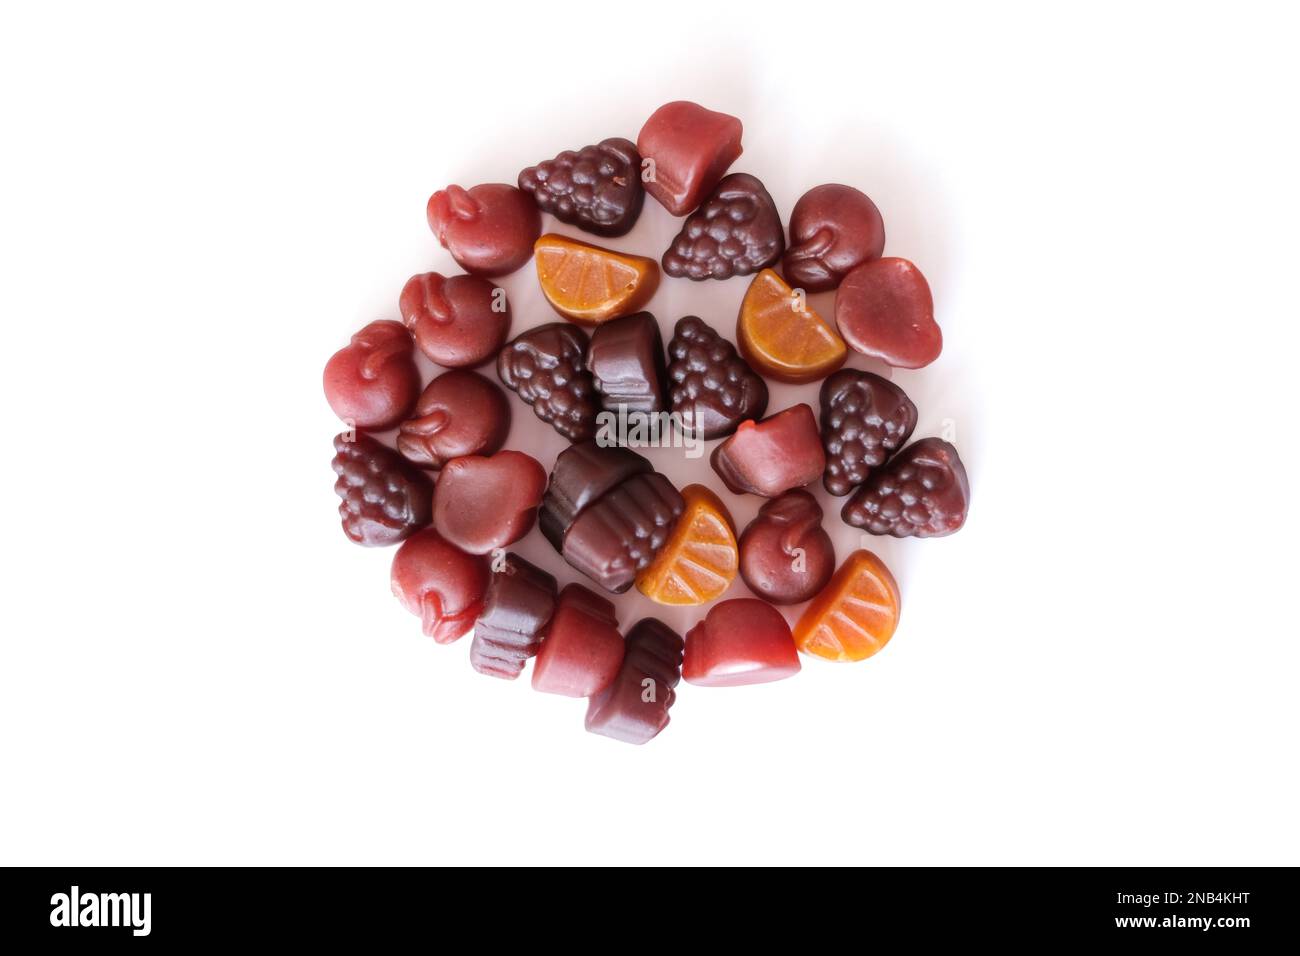 Close-up texture of yellow and brown multivitamin tablets in form of fruits on white background Stock Photo